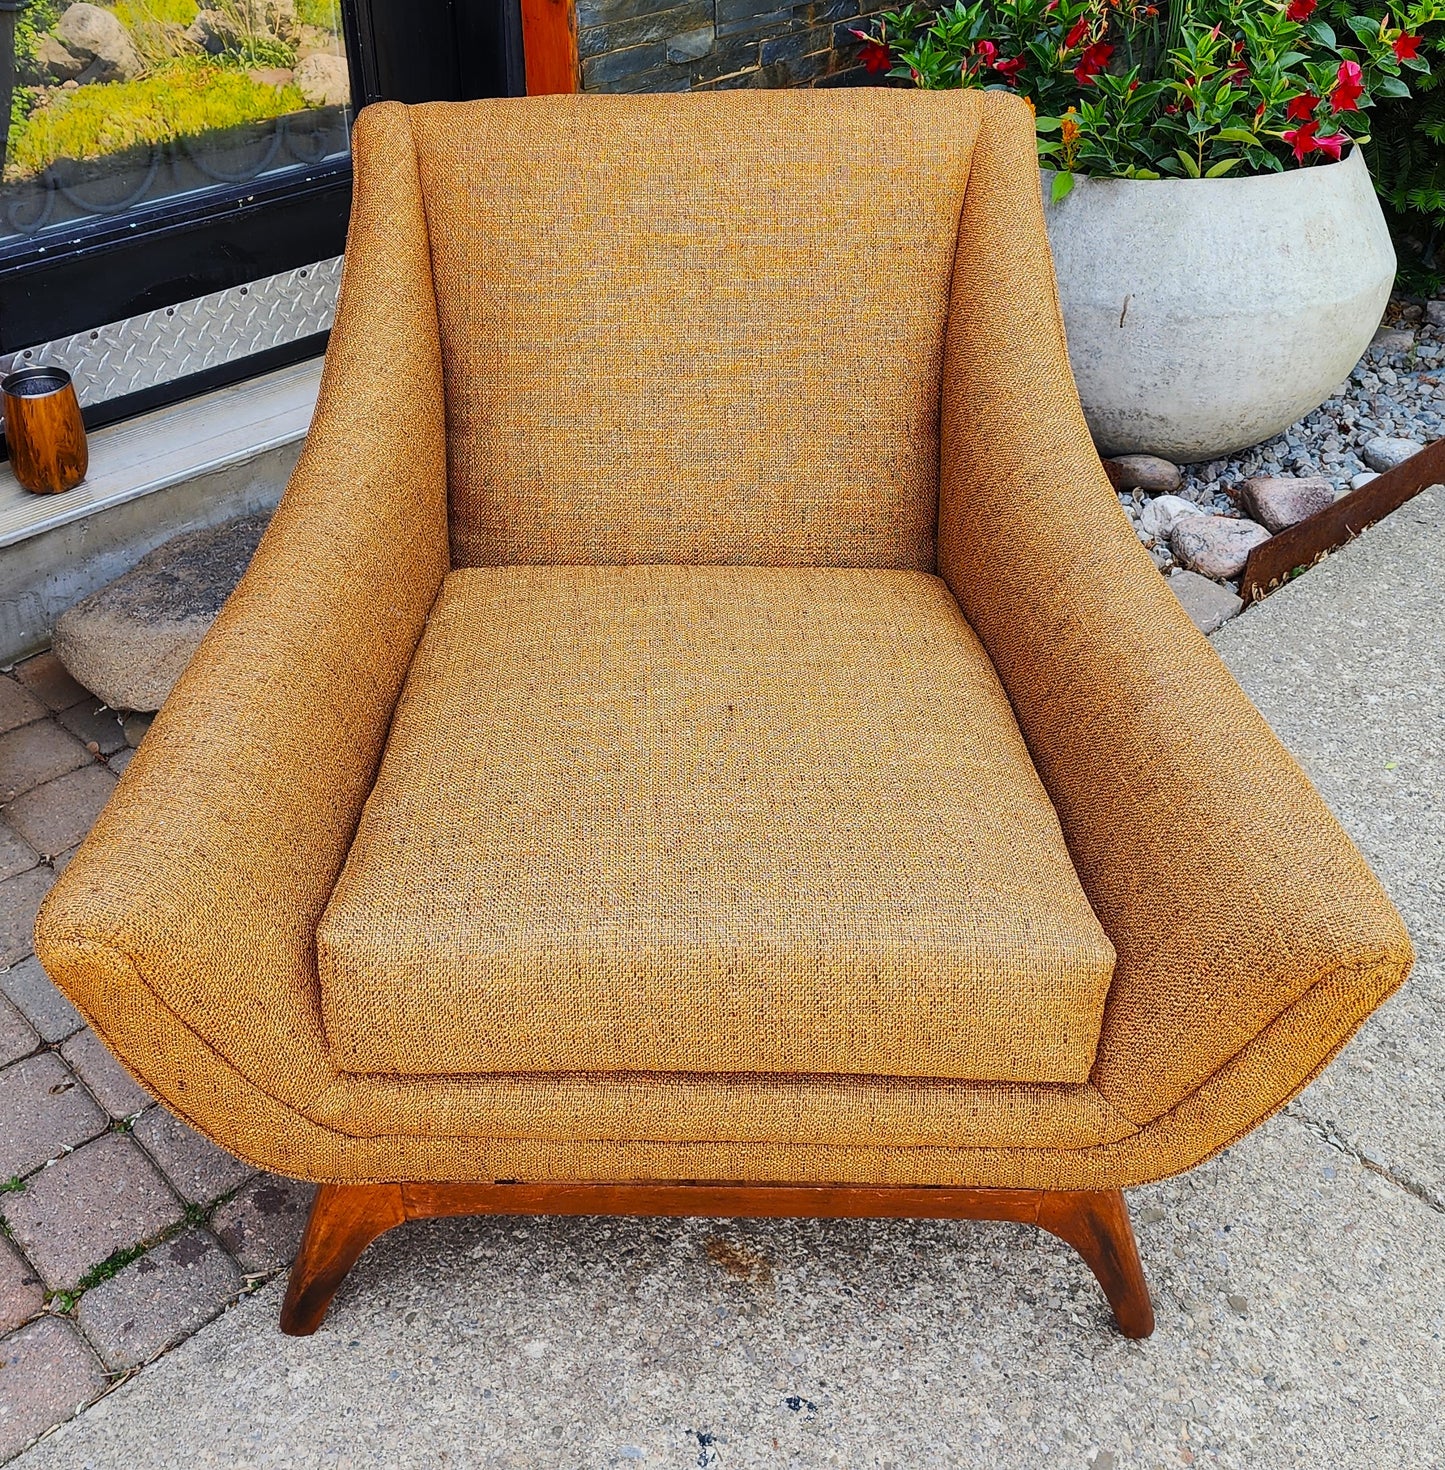 2 REFINISHED REUPHOLSTERED Mid Century Modern Armchairs & Ottoman